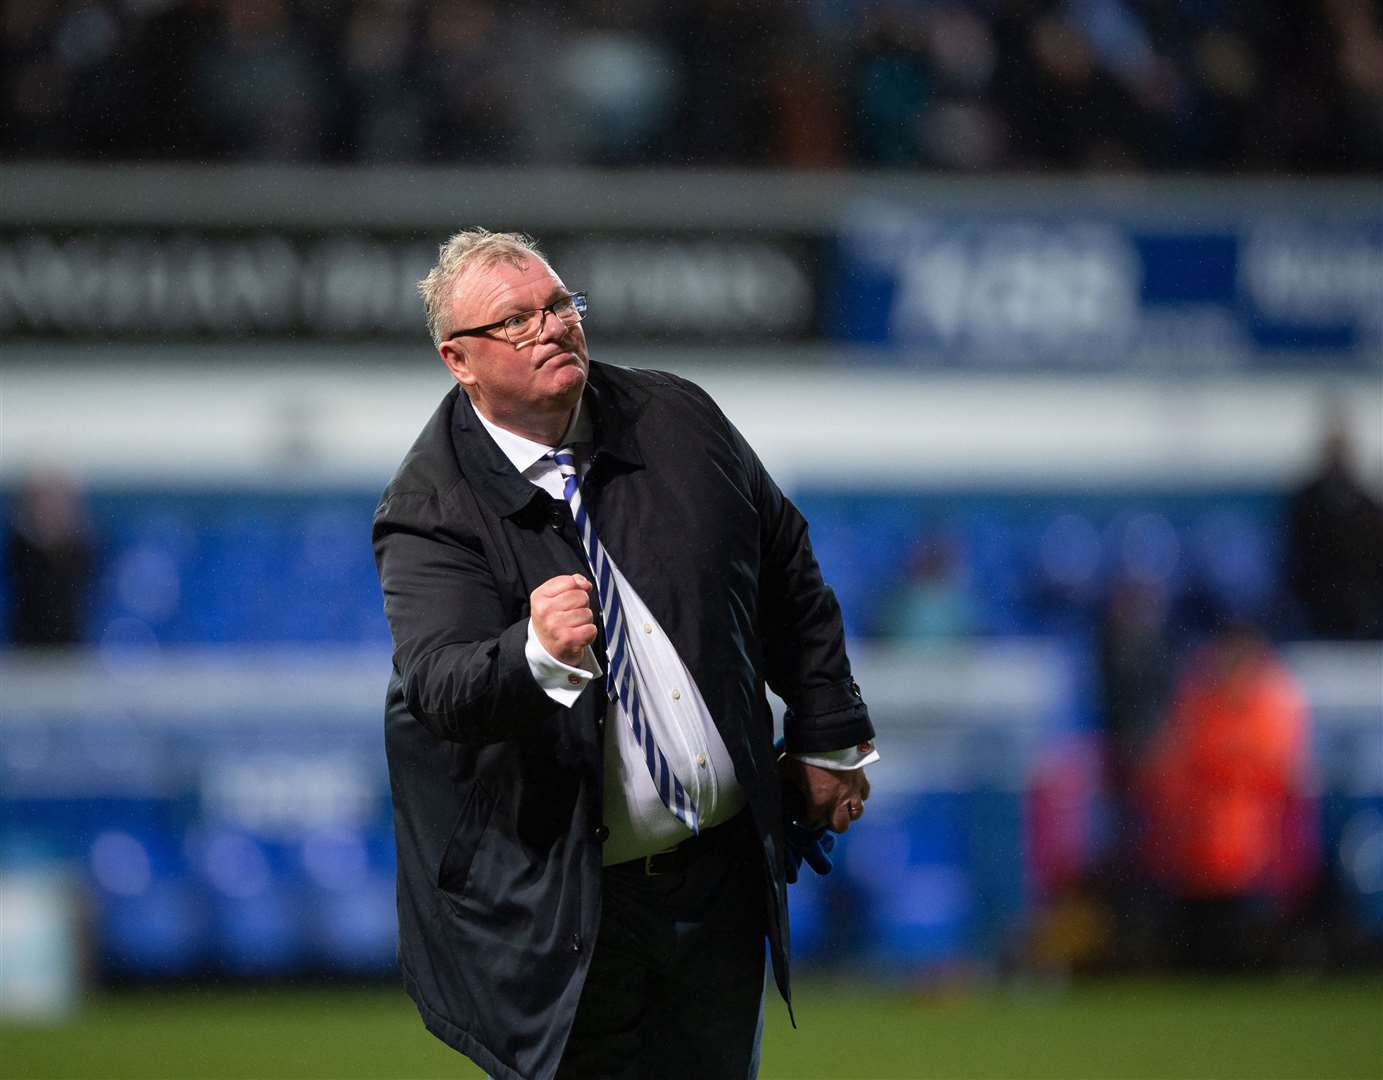 Steve Evans hopes his side's poor run of form ends at Ipswich